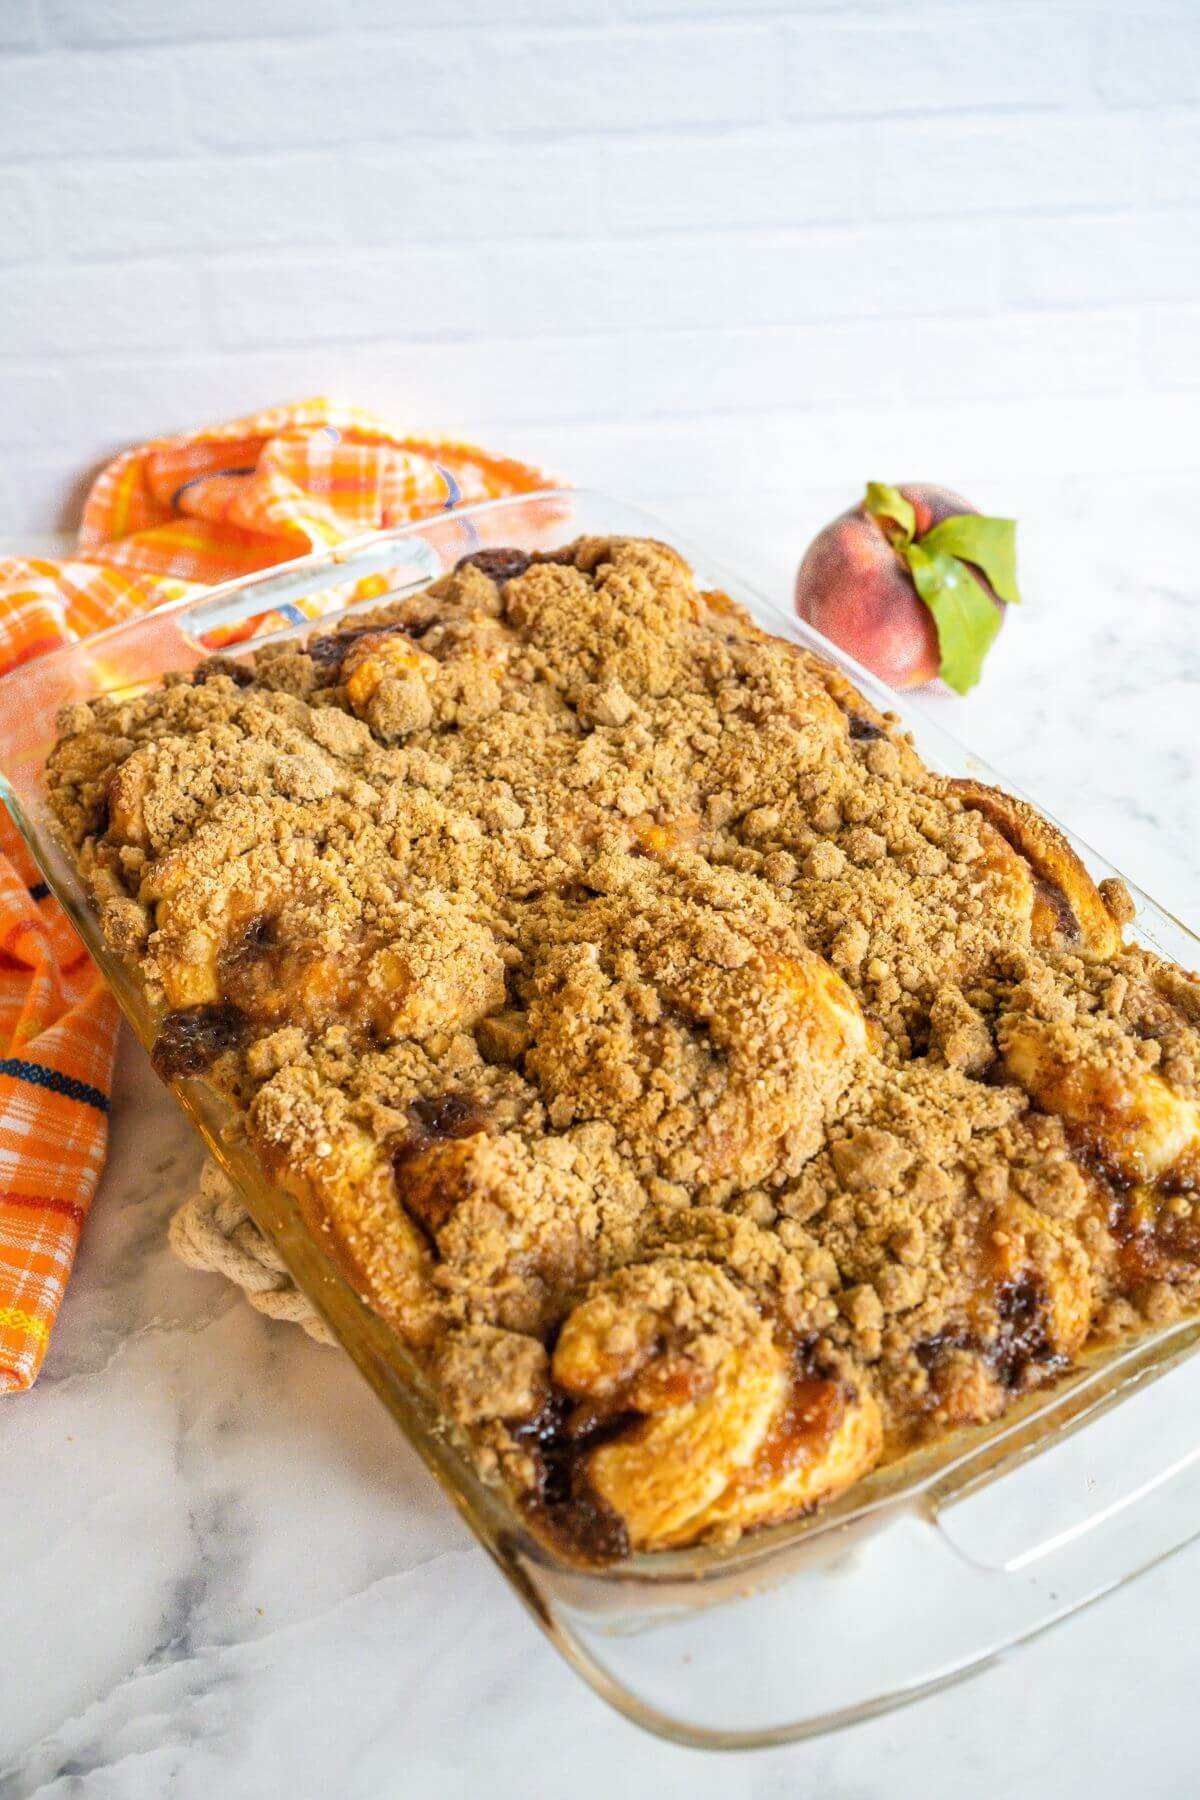 Peach Cobbler Cinnamon Rolls Crumb Topping on marble counter by peach.